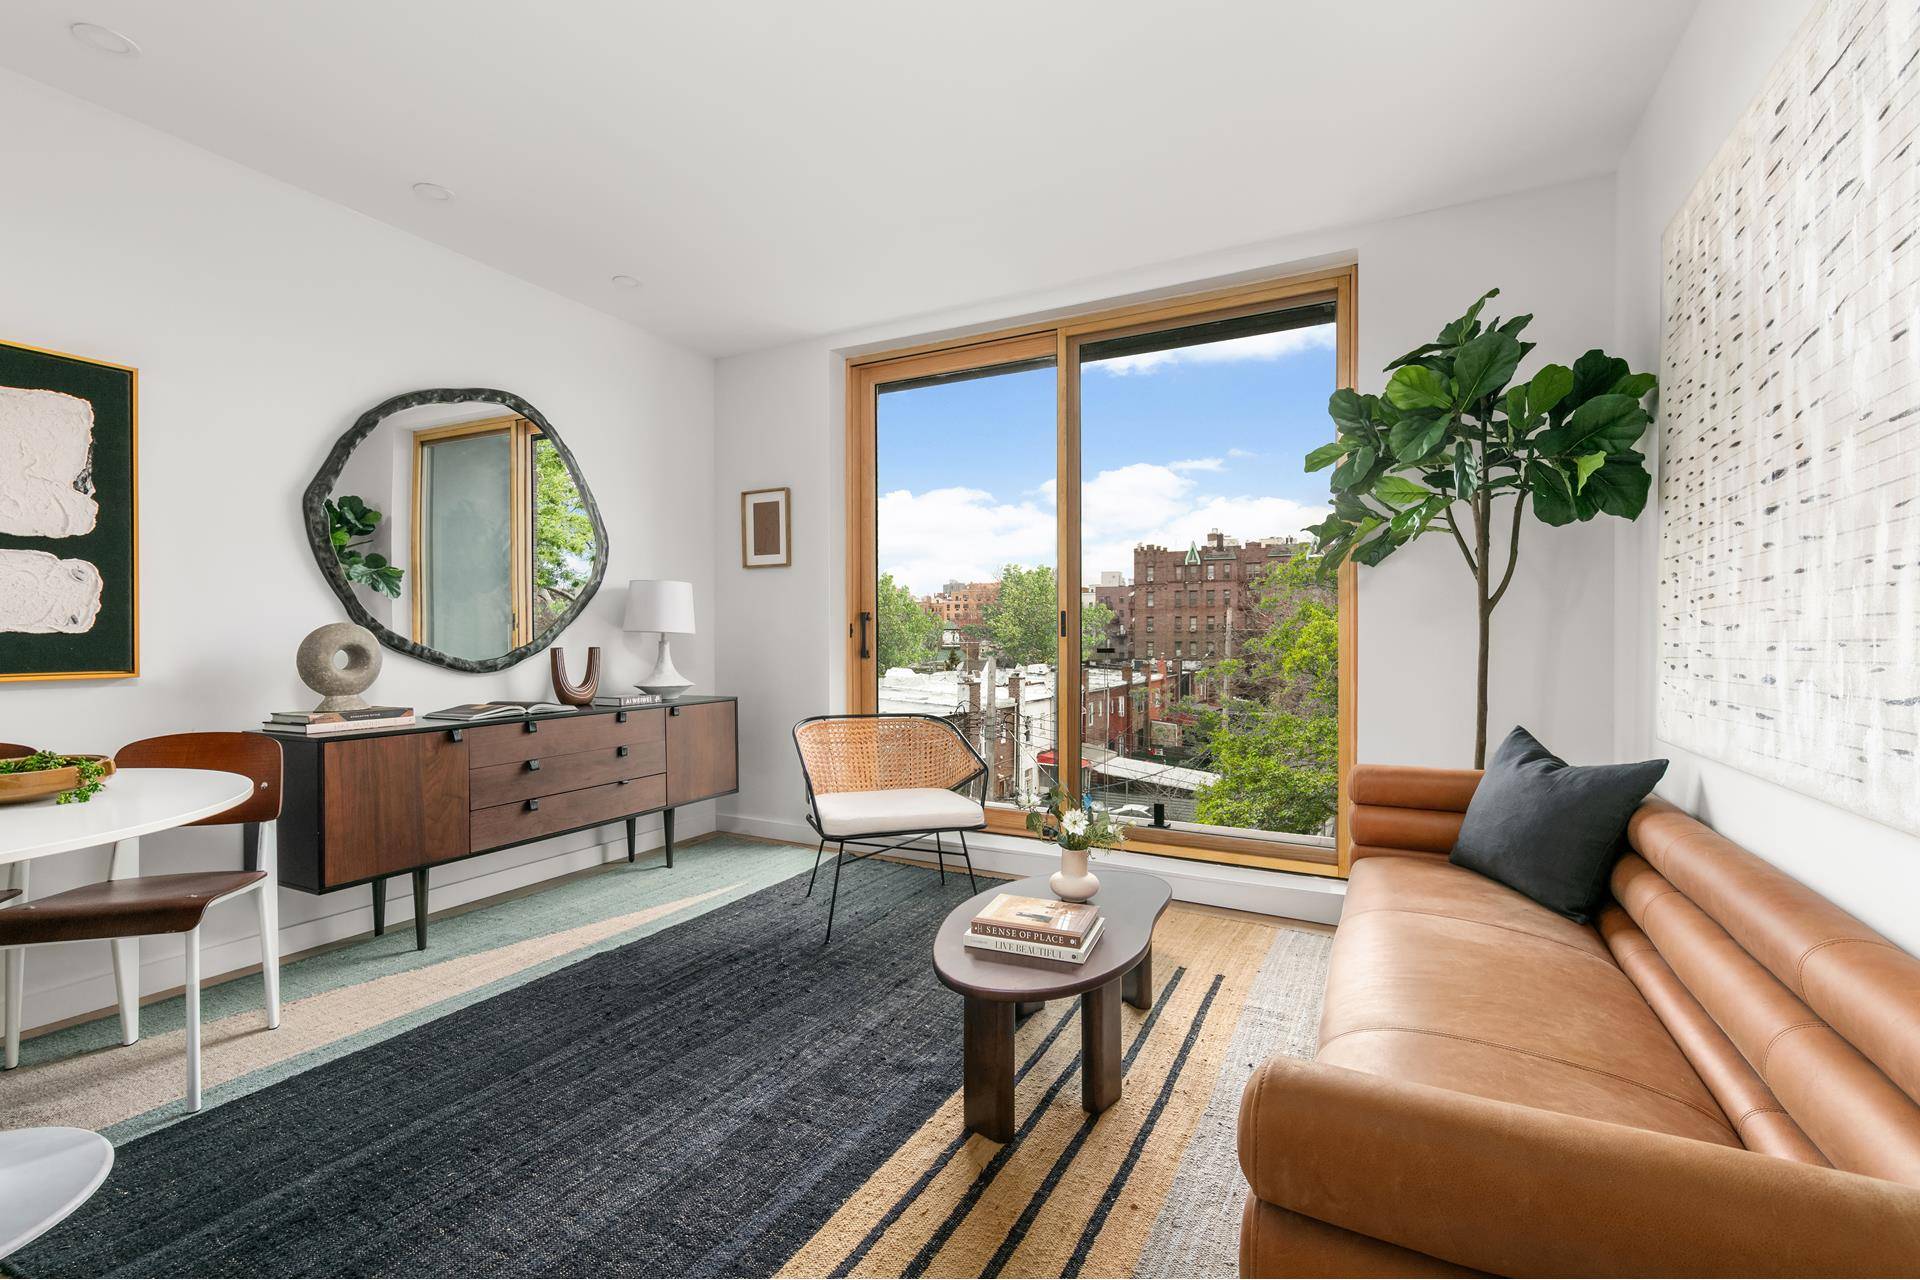 Introducing 4A at 406 Midwood Street An absolutely perfect 1 bed, 1 bath with a private balcony in a stunning new development !